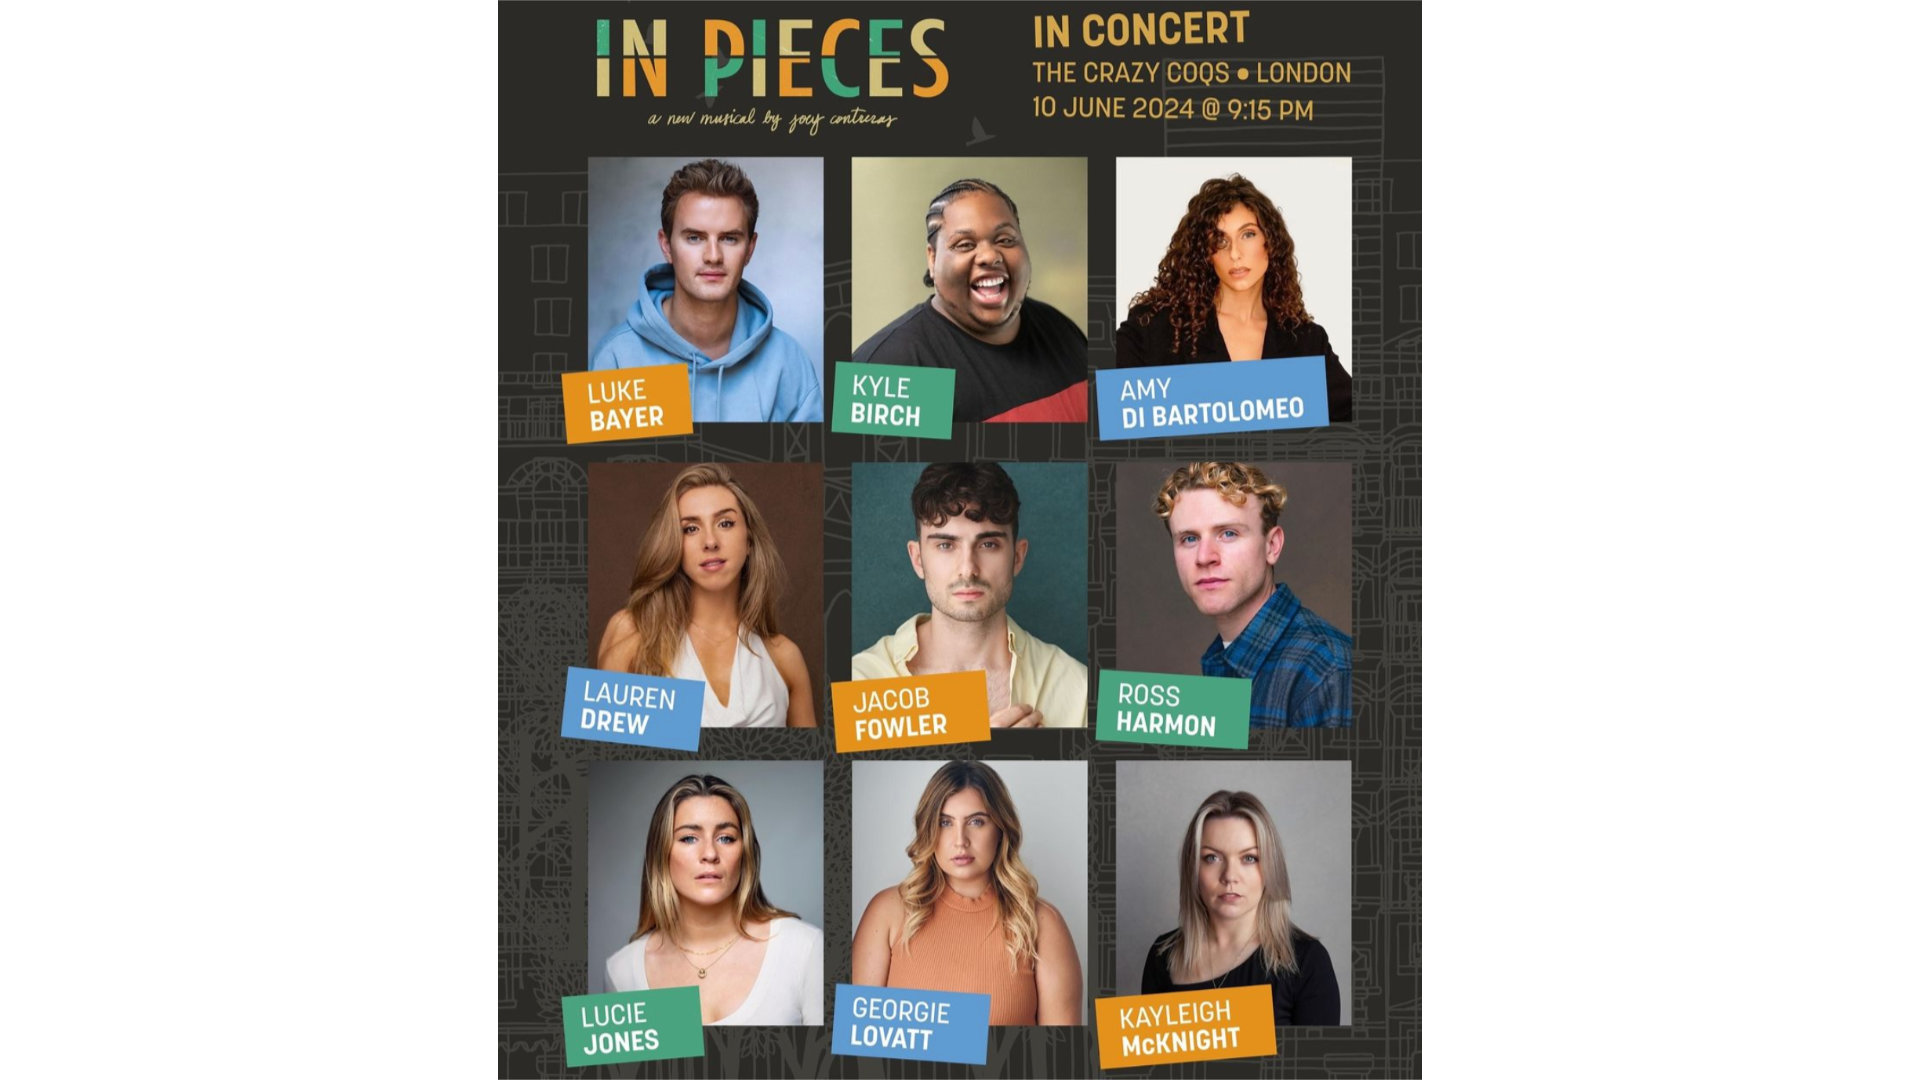 In Pieces concert poster